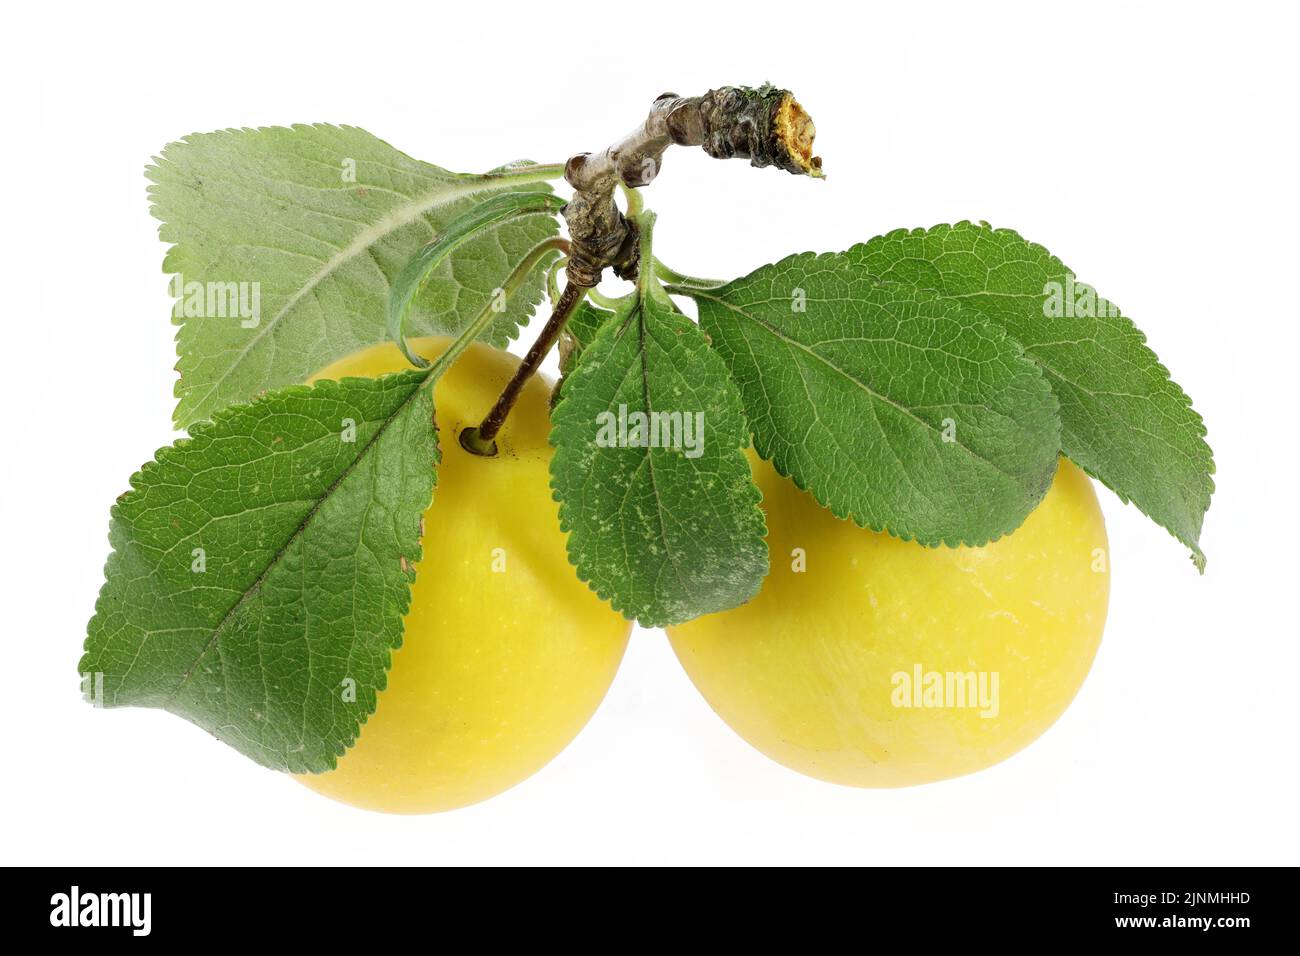 mirabelle plums isolated on white background Stock Photo